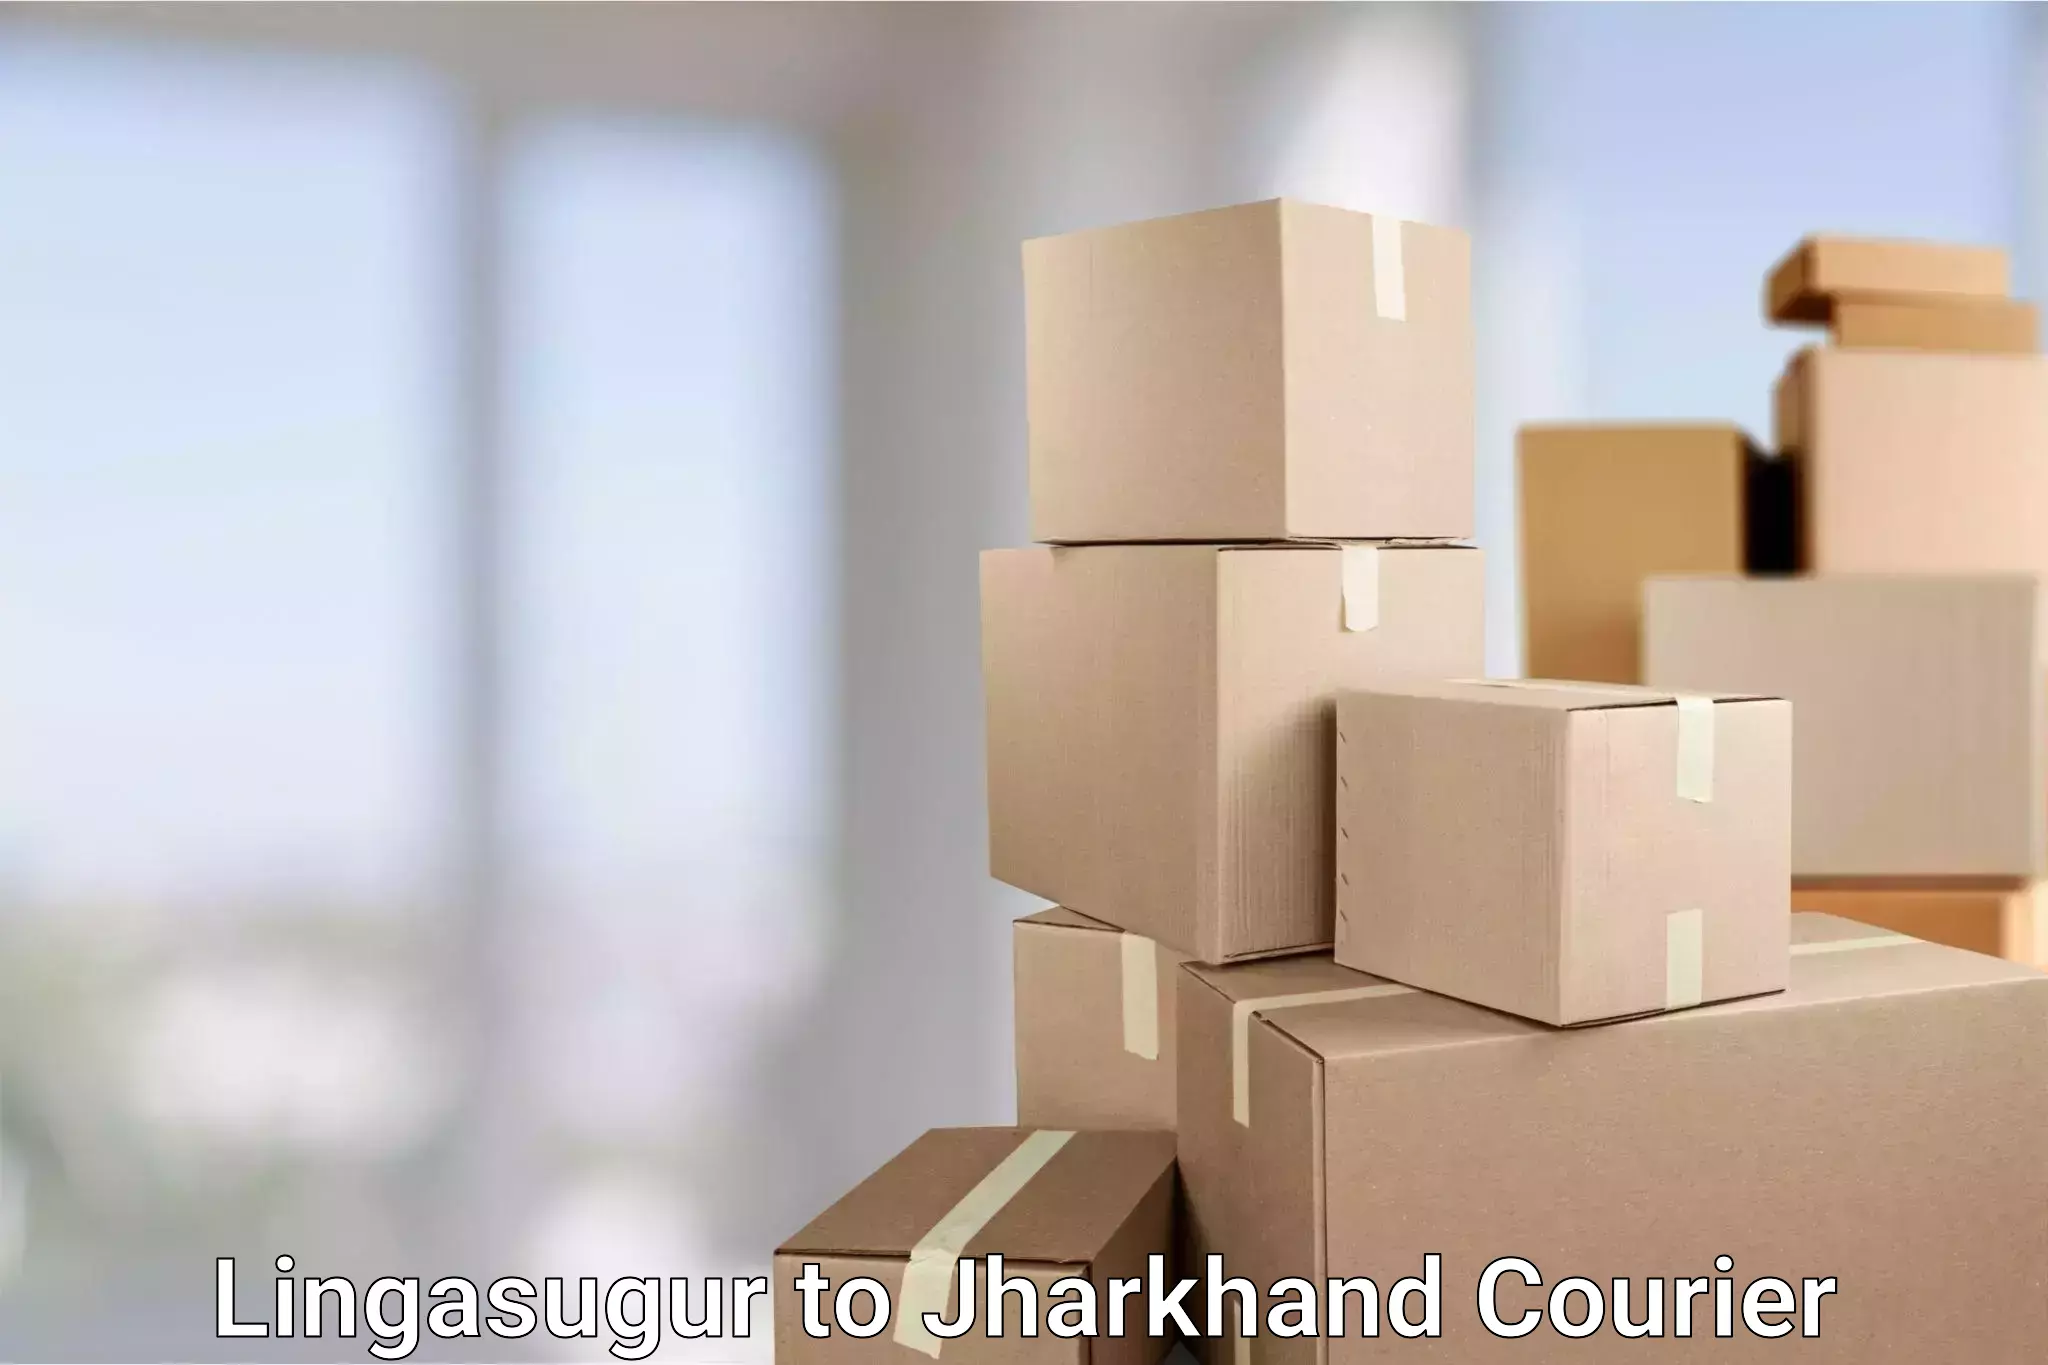 Next-day delivery options Lingasugur to Dhanbad